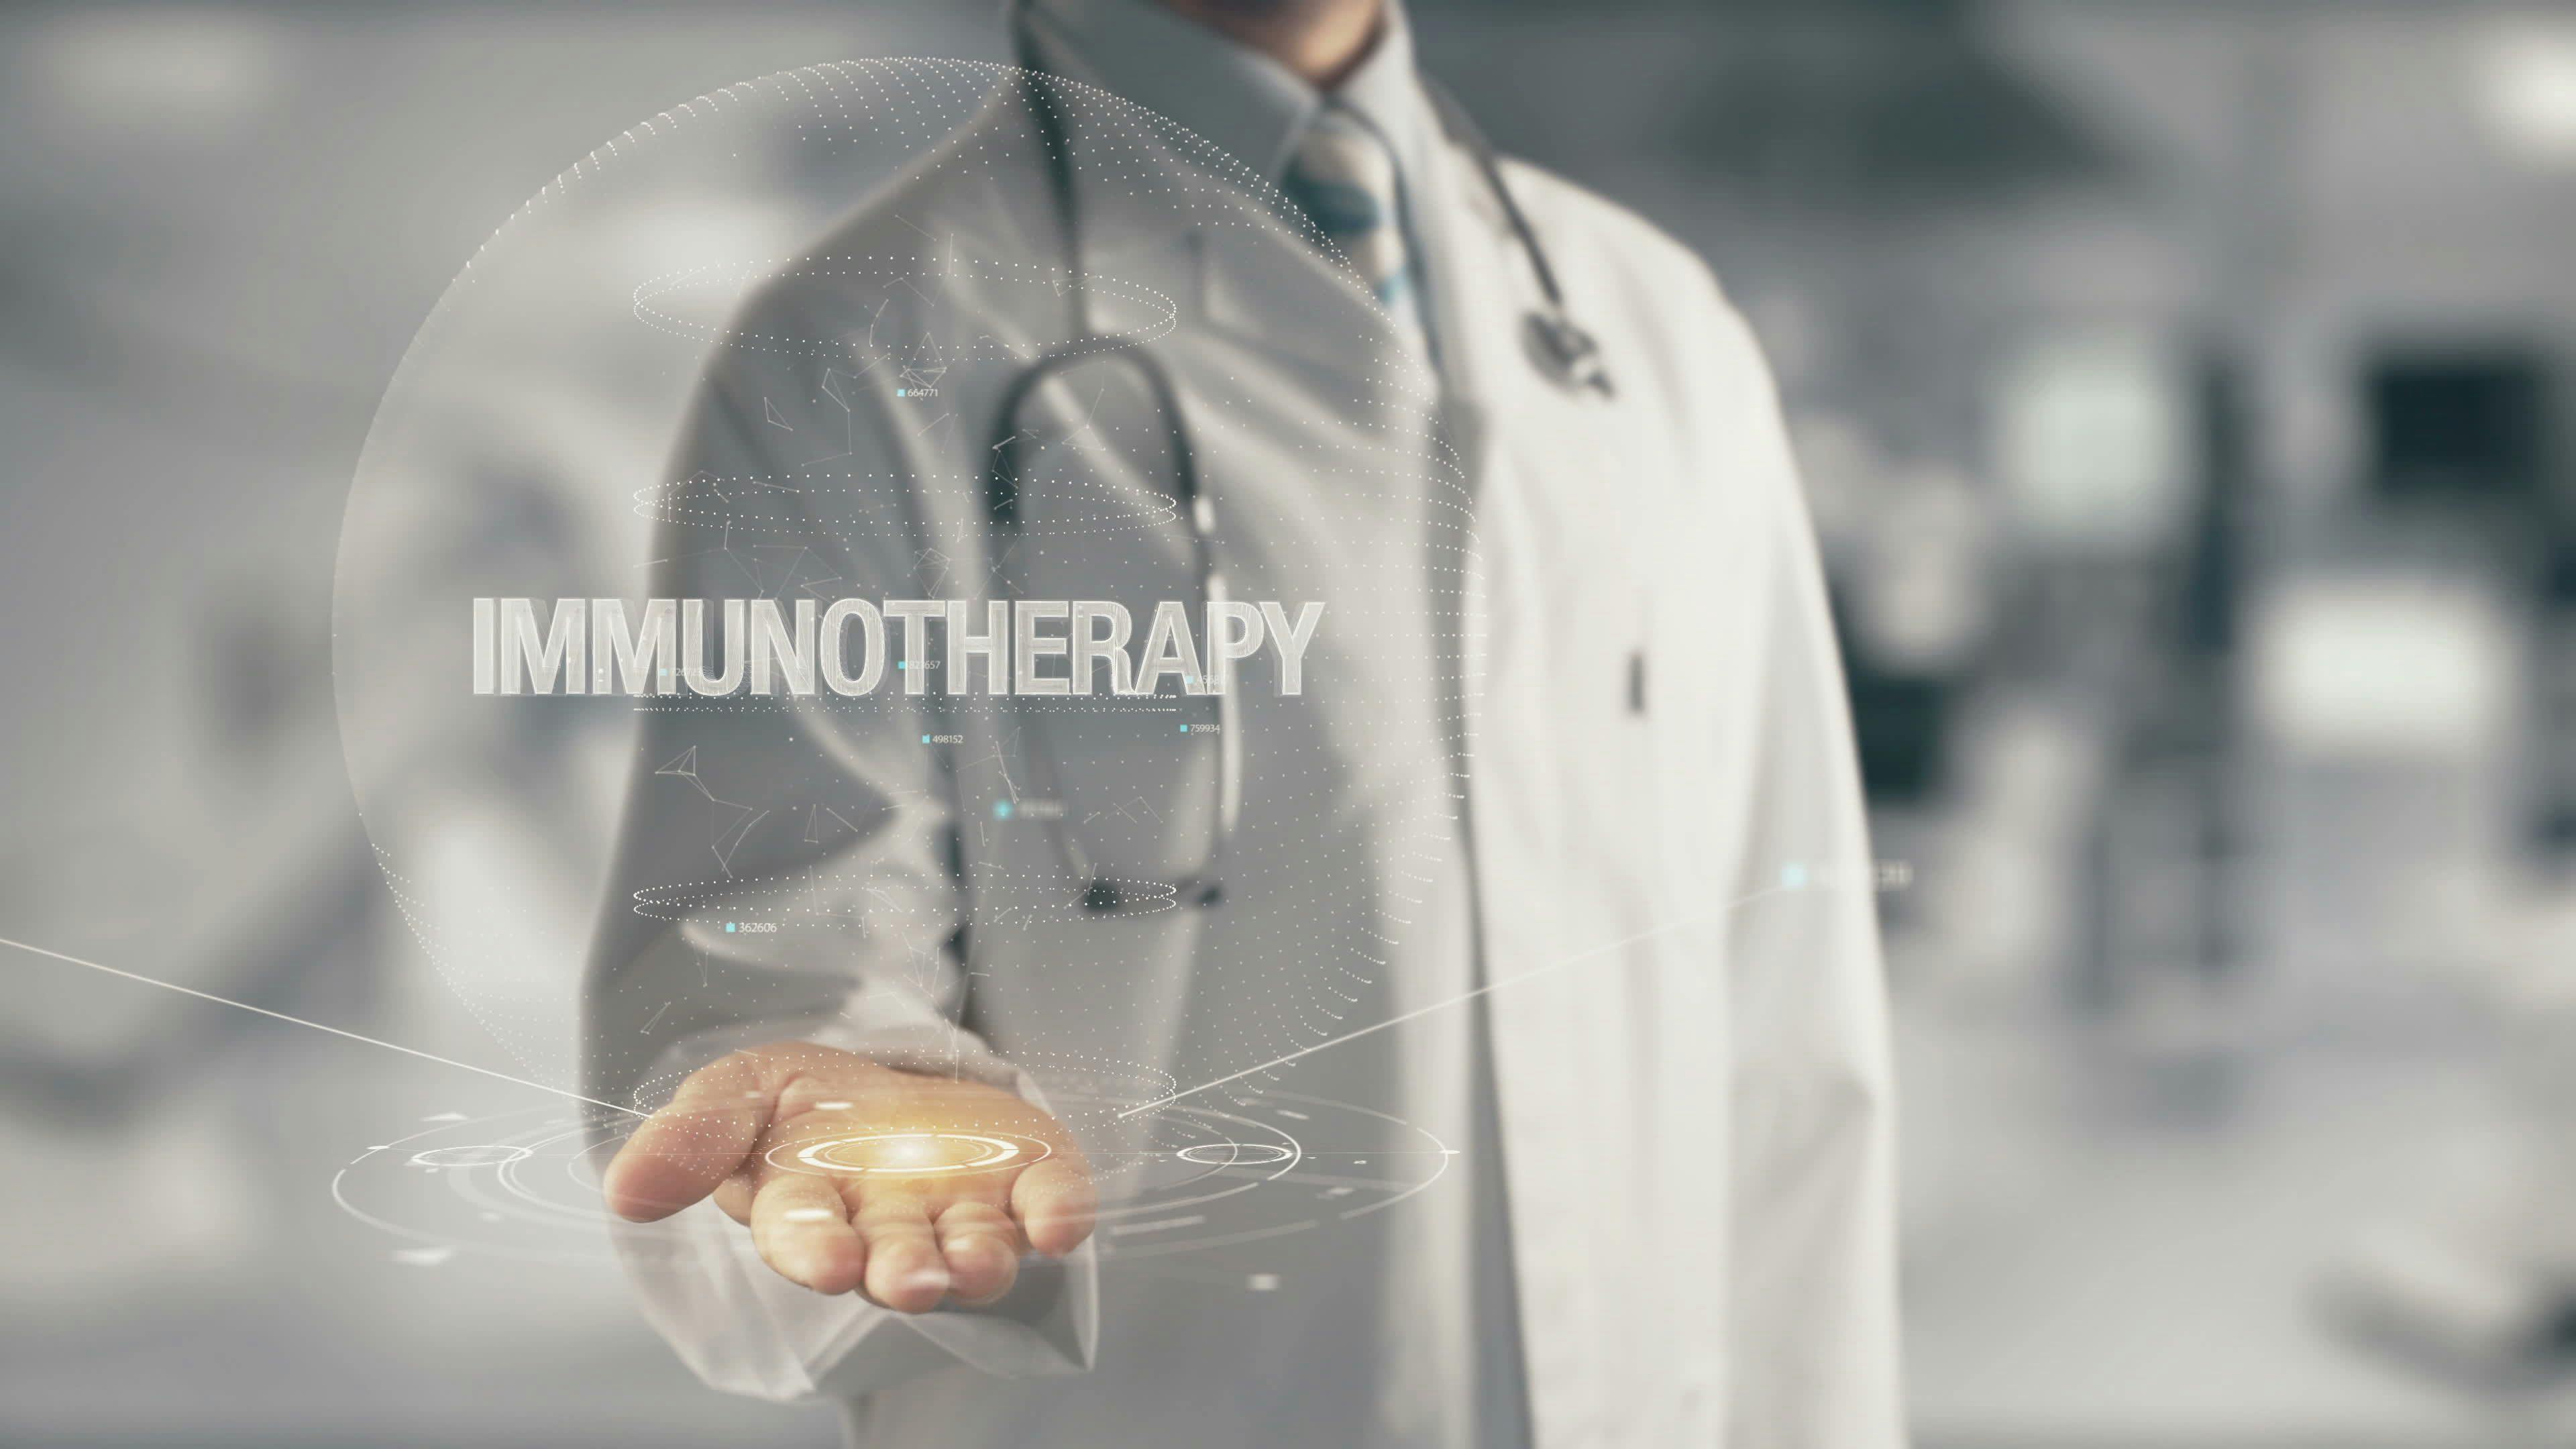 doctor in a while coat holding his hand under the word "Immunotherapy"